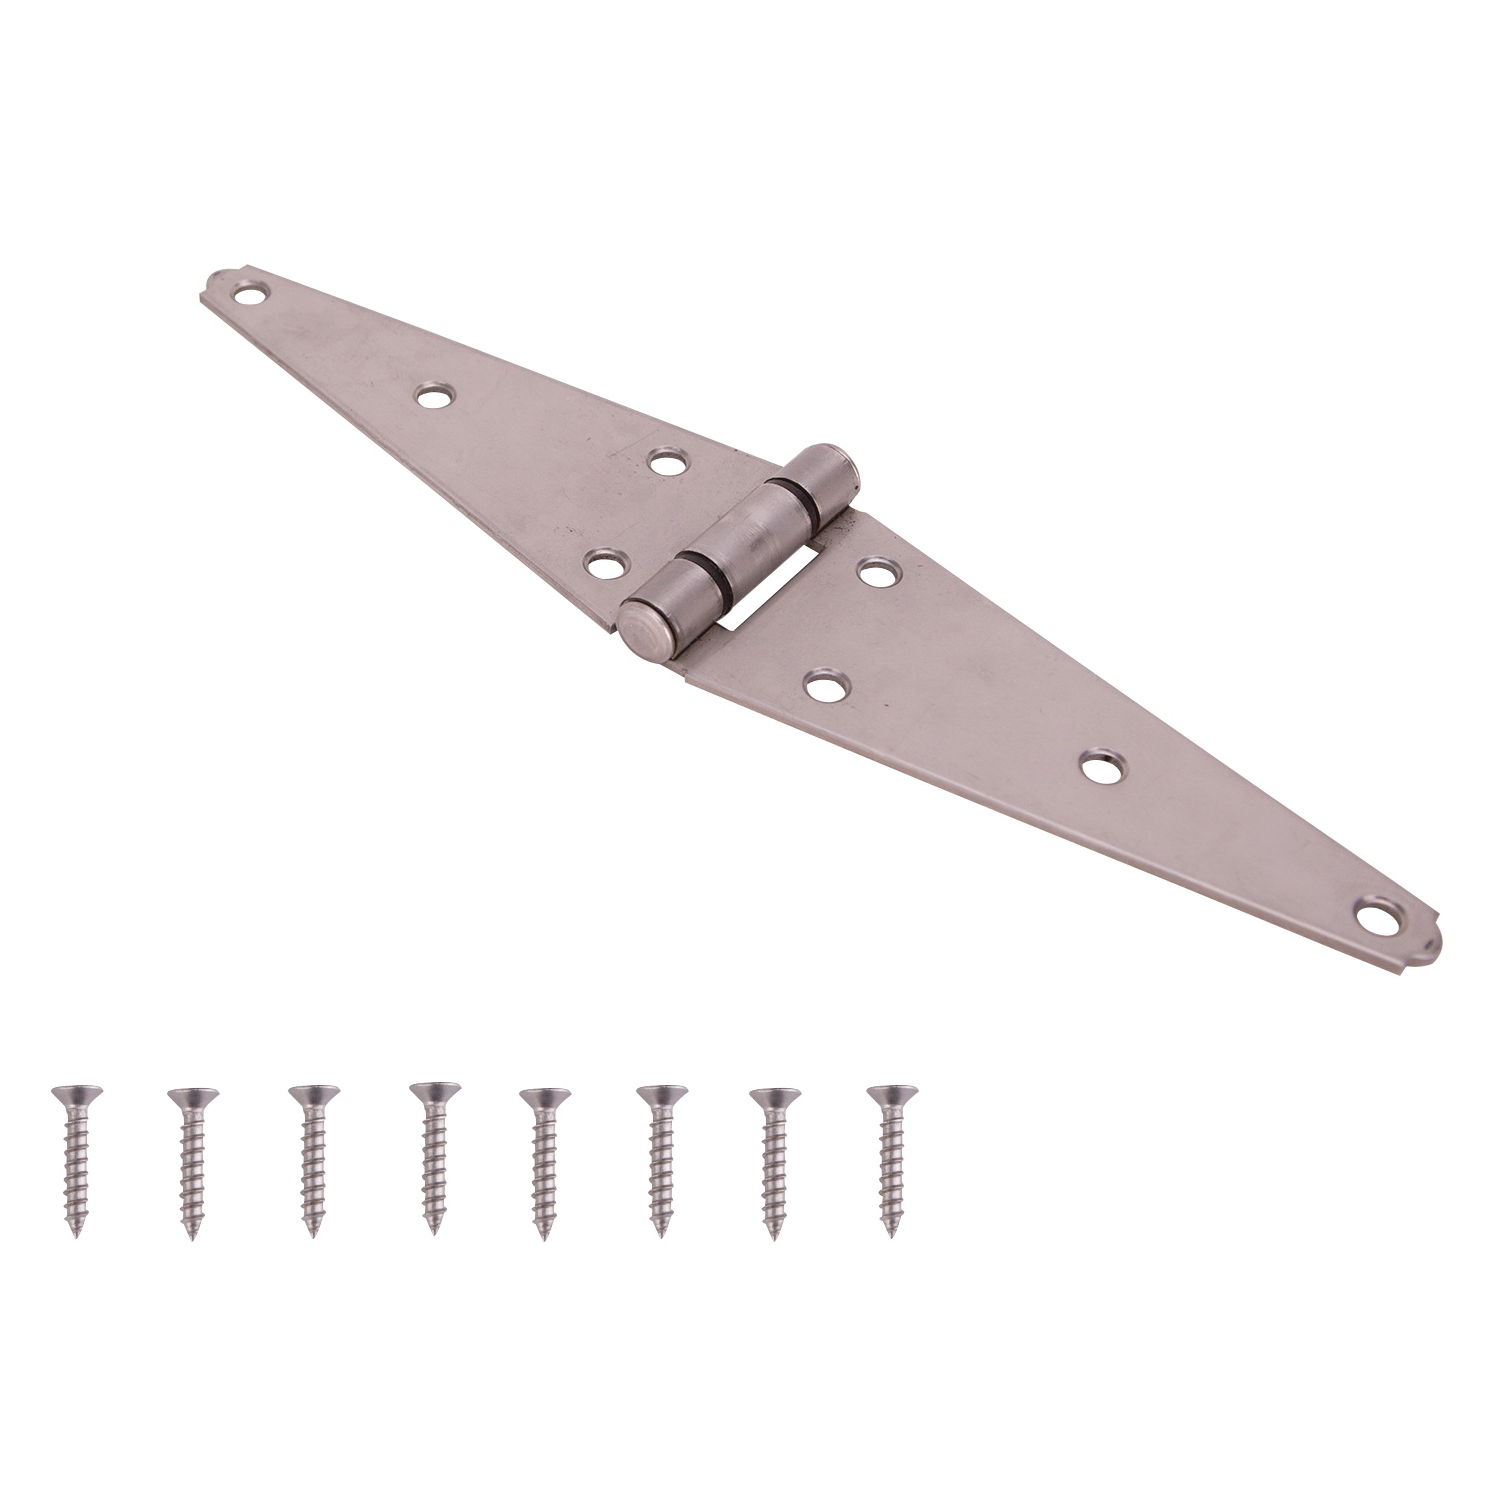 HSH-S06-C2PS Heavy Duty Strap Hinge, 2.6 mm Thick Leaf, Brushed Stainless Steel, 180 Range of Motion